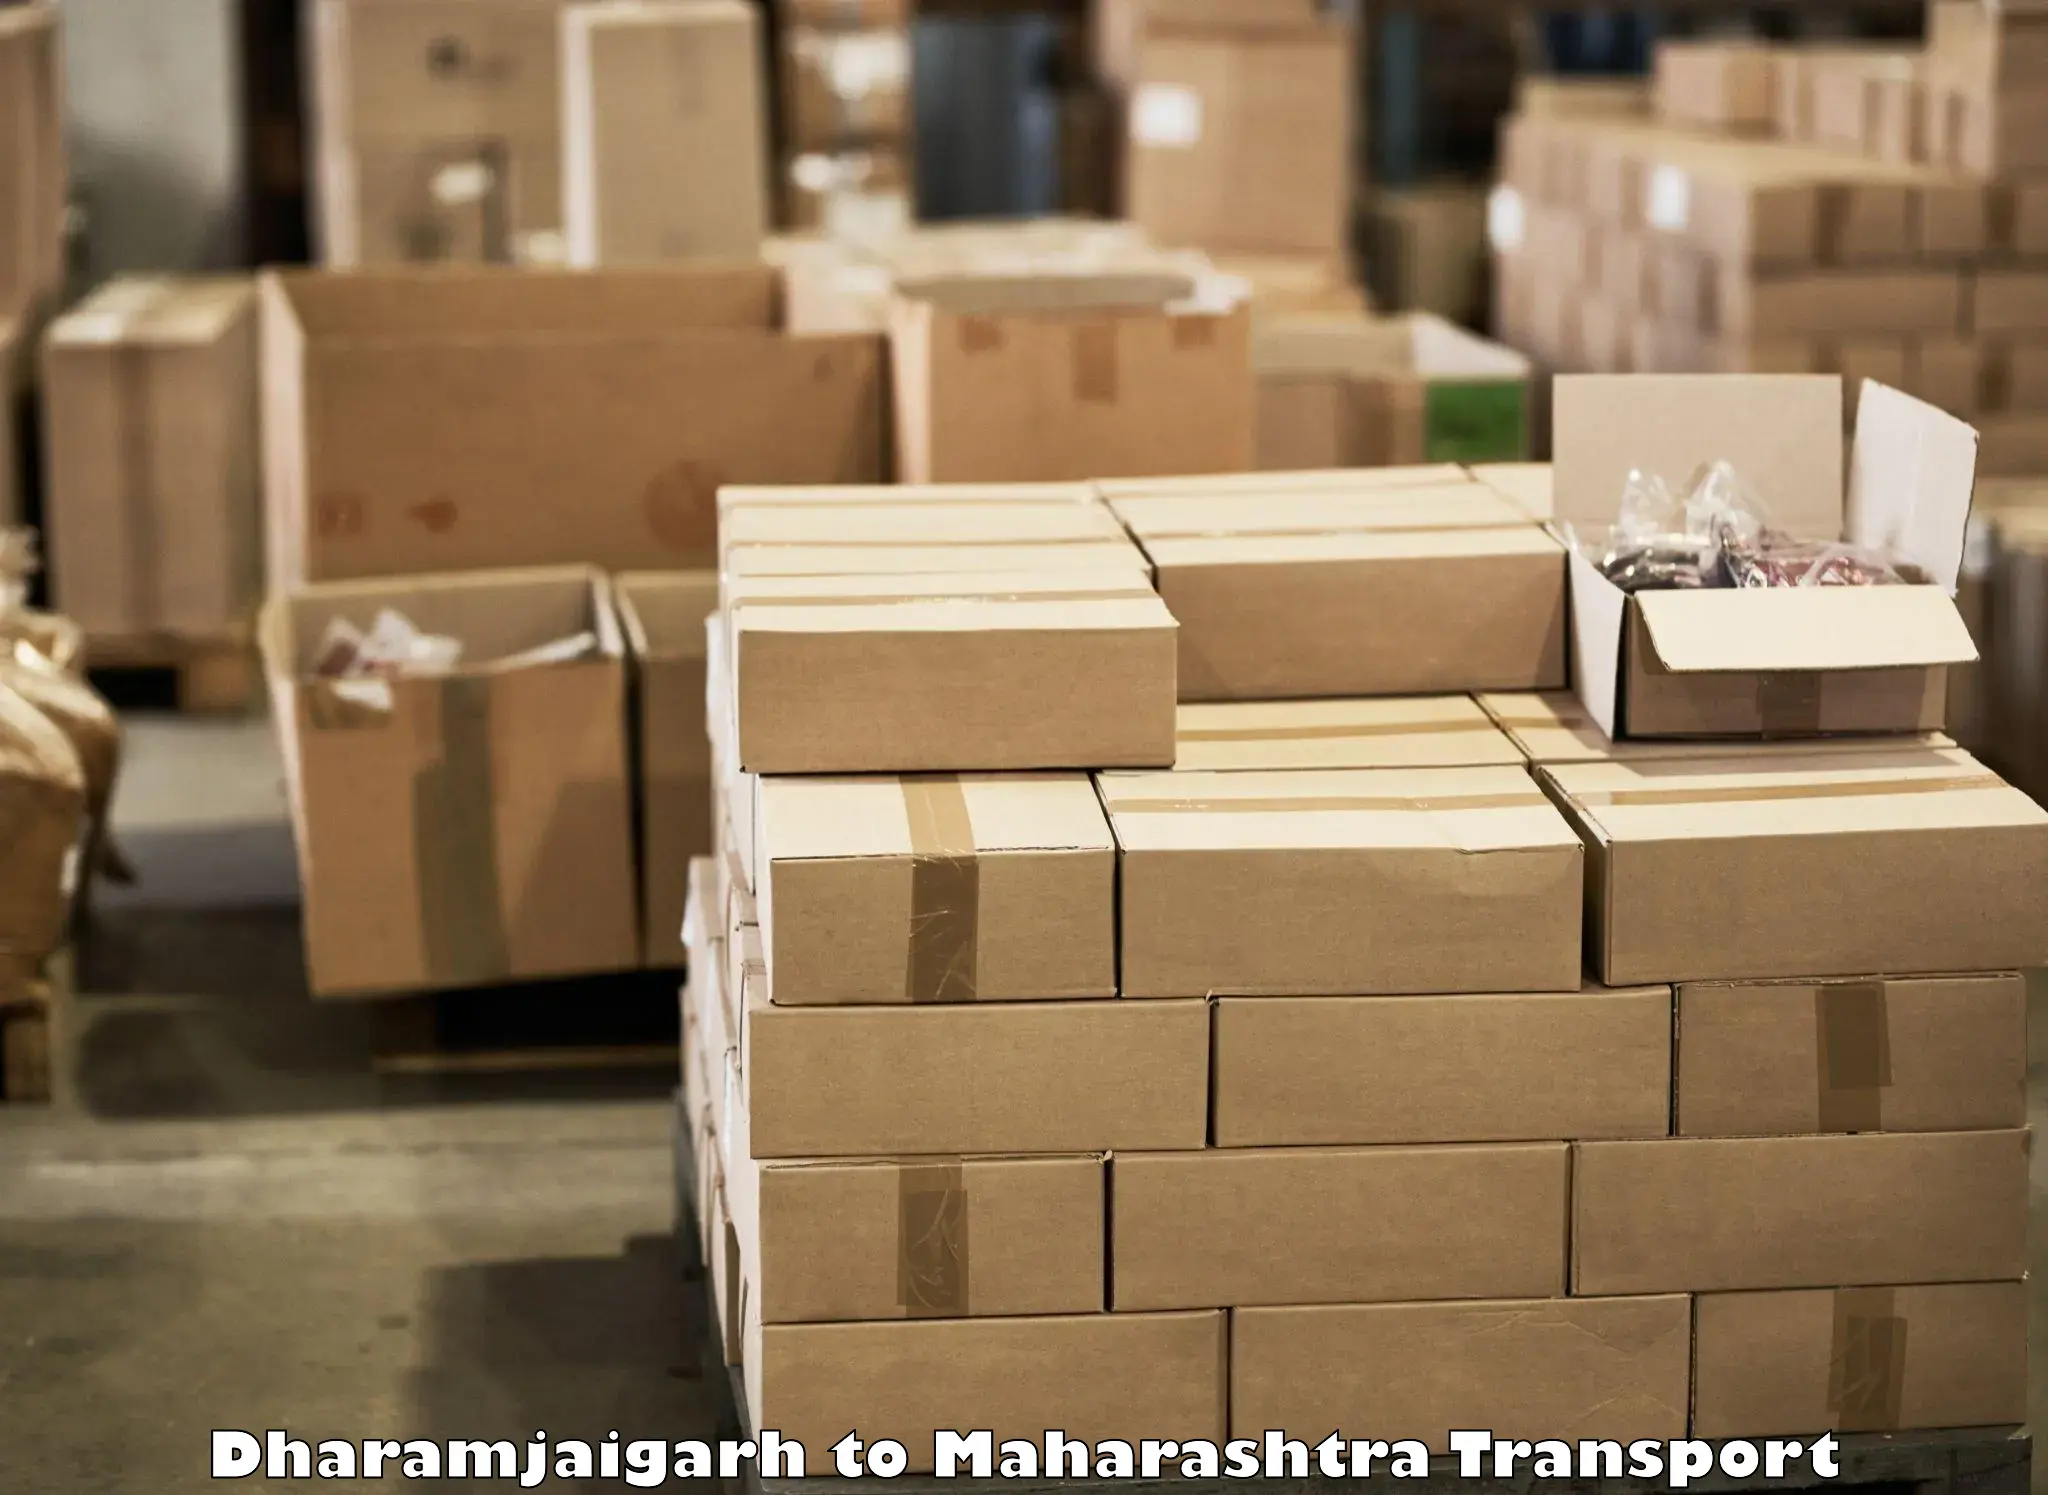 Cargo train transport services Dharamjaigarh to Nagpur